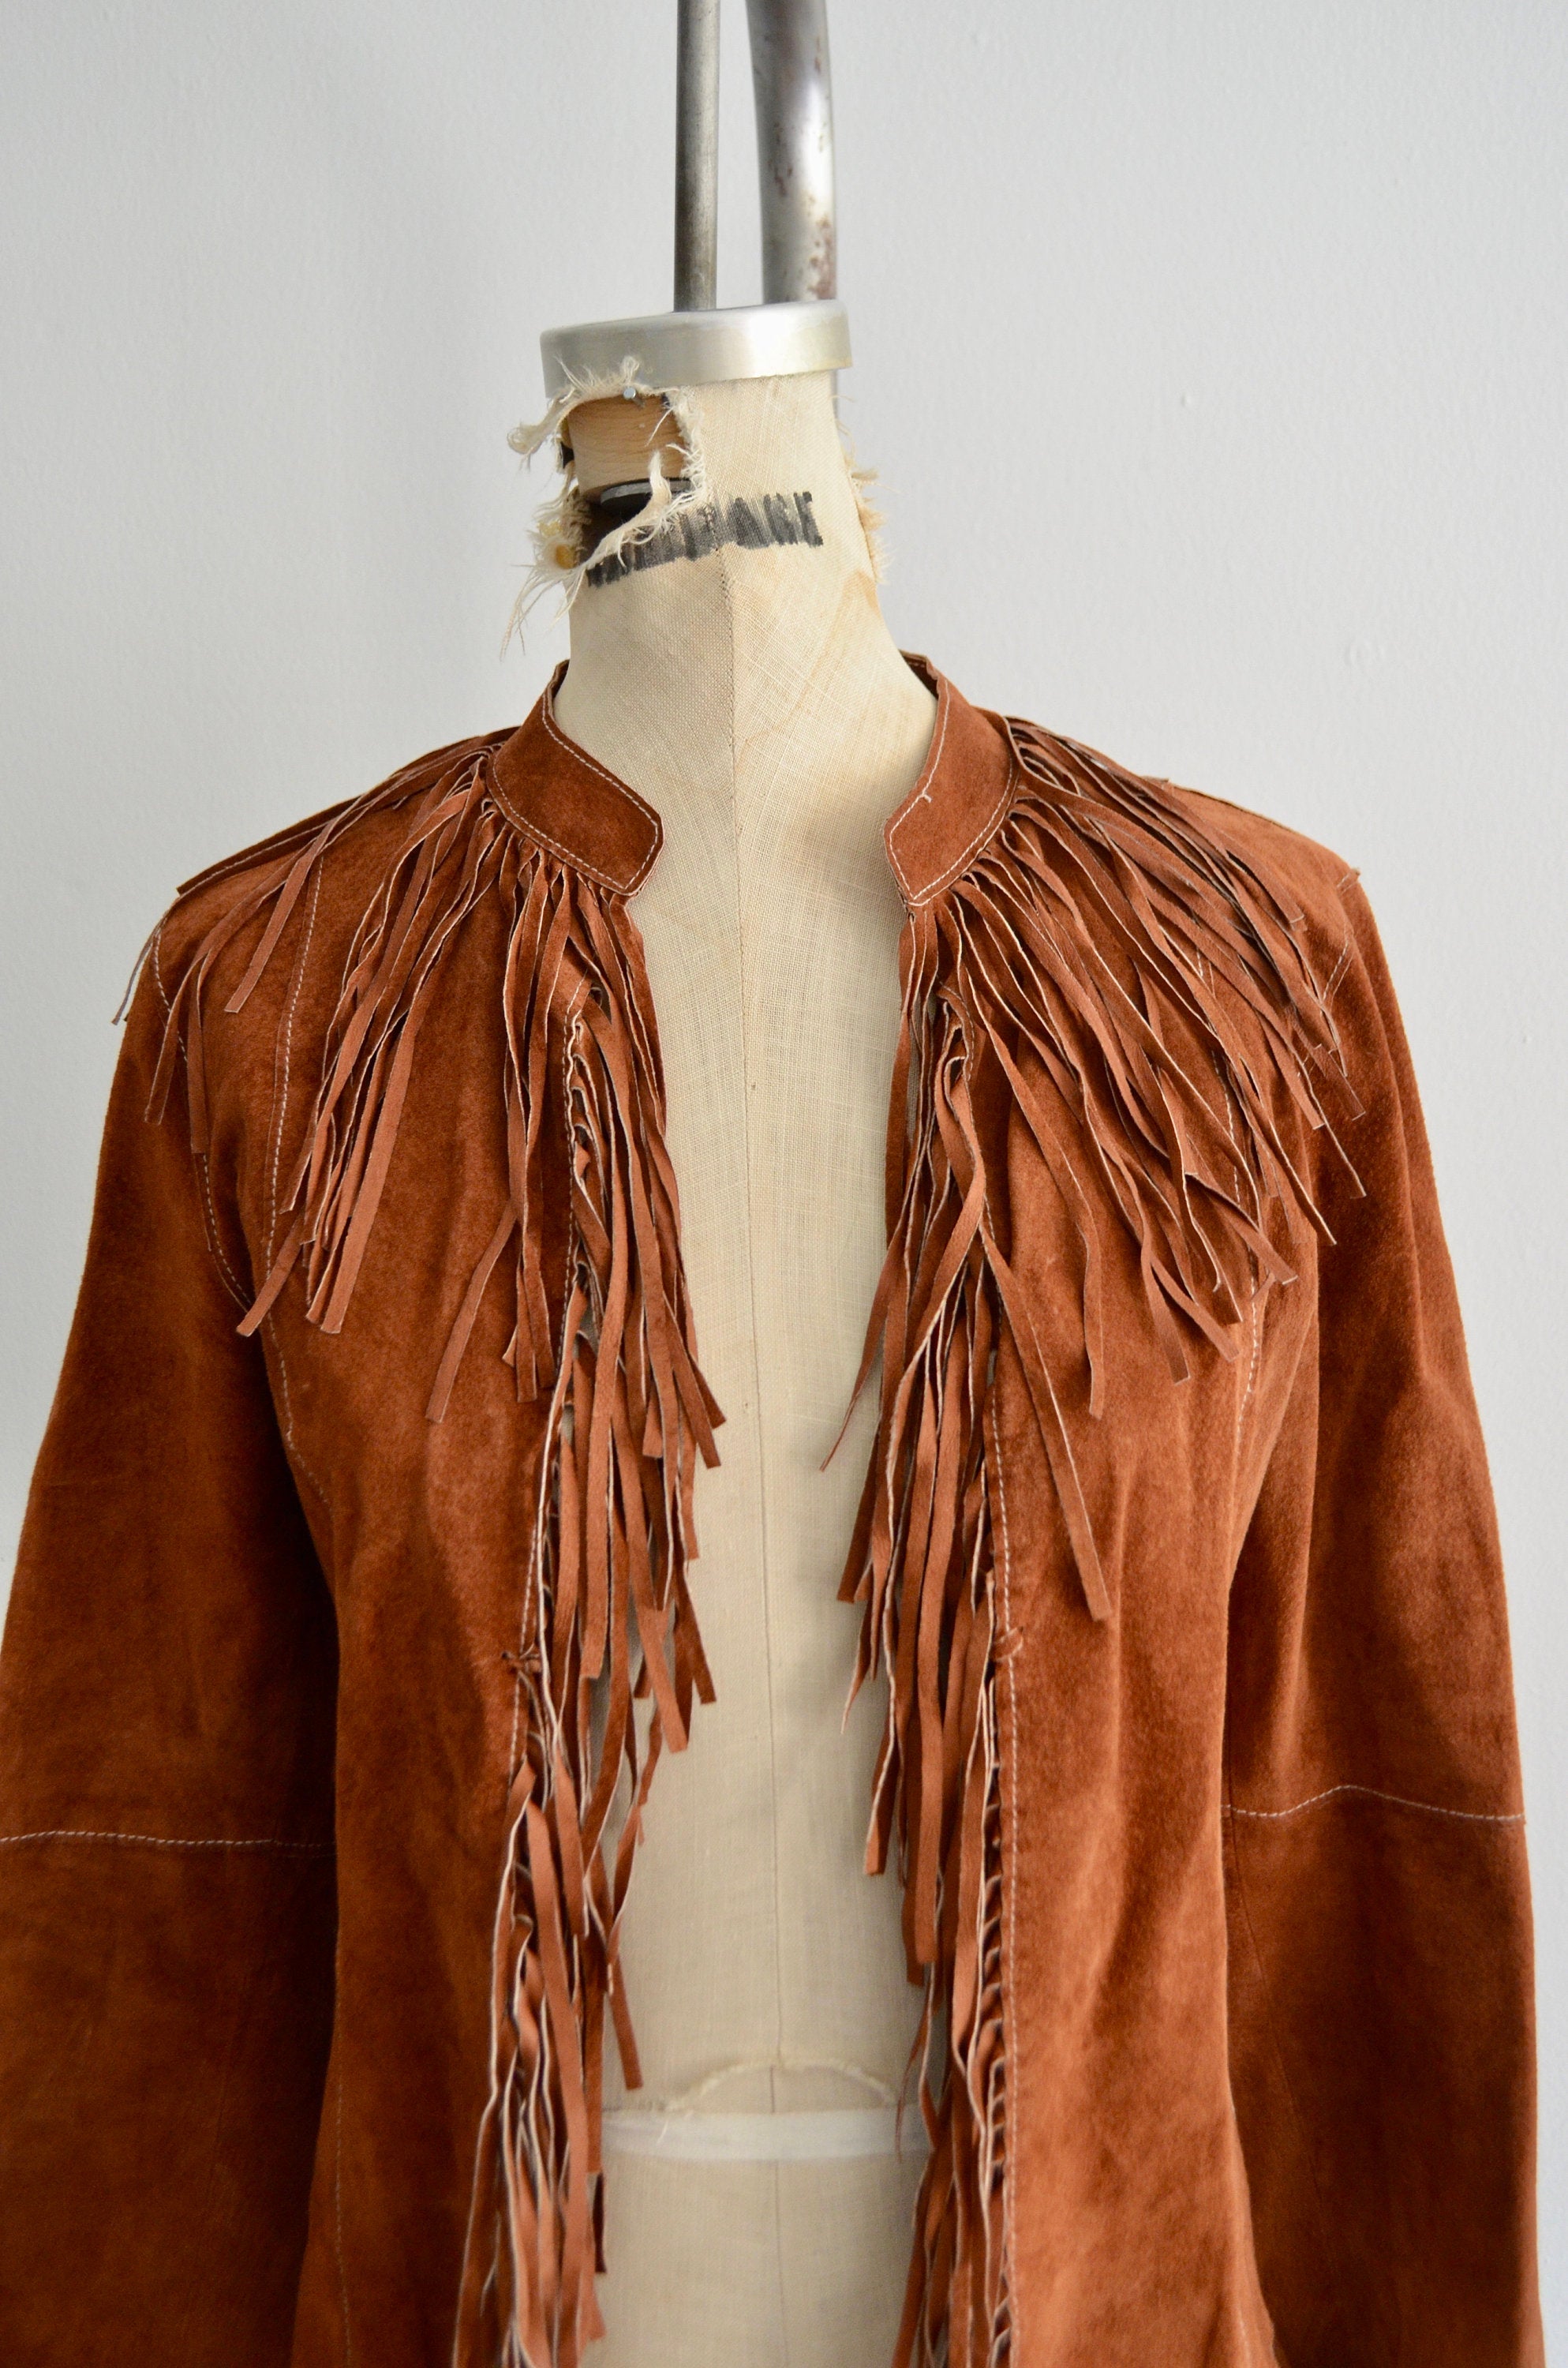 Bebe Genuine Suede Leather Brown Jacket With Fringe Lightweight Western Bohemian Cowgirl